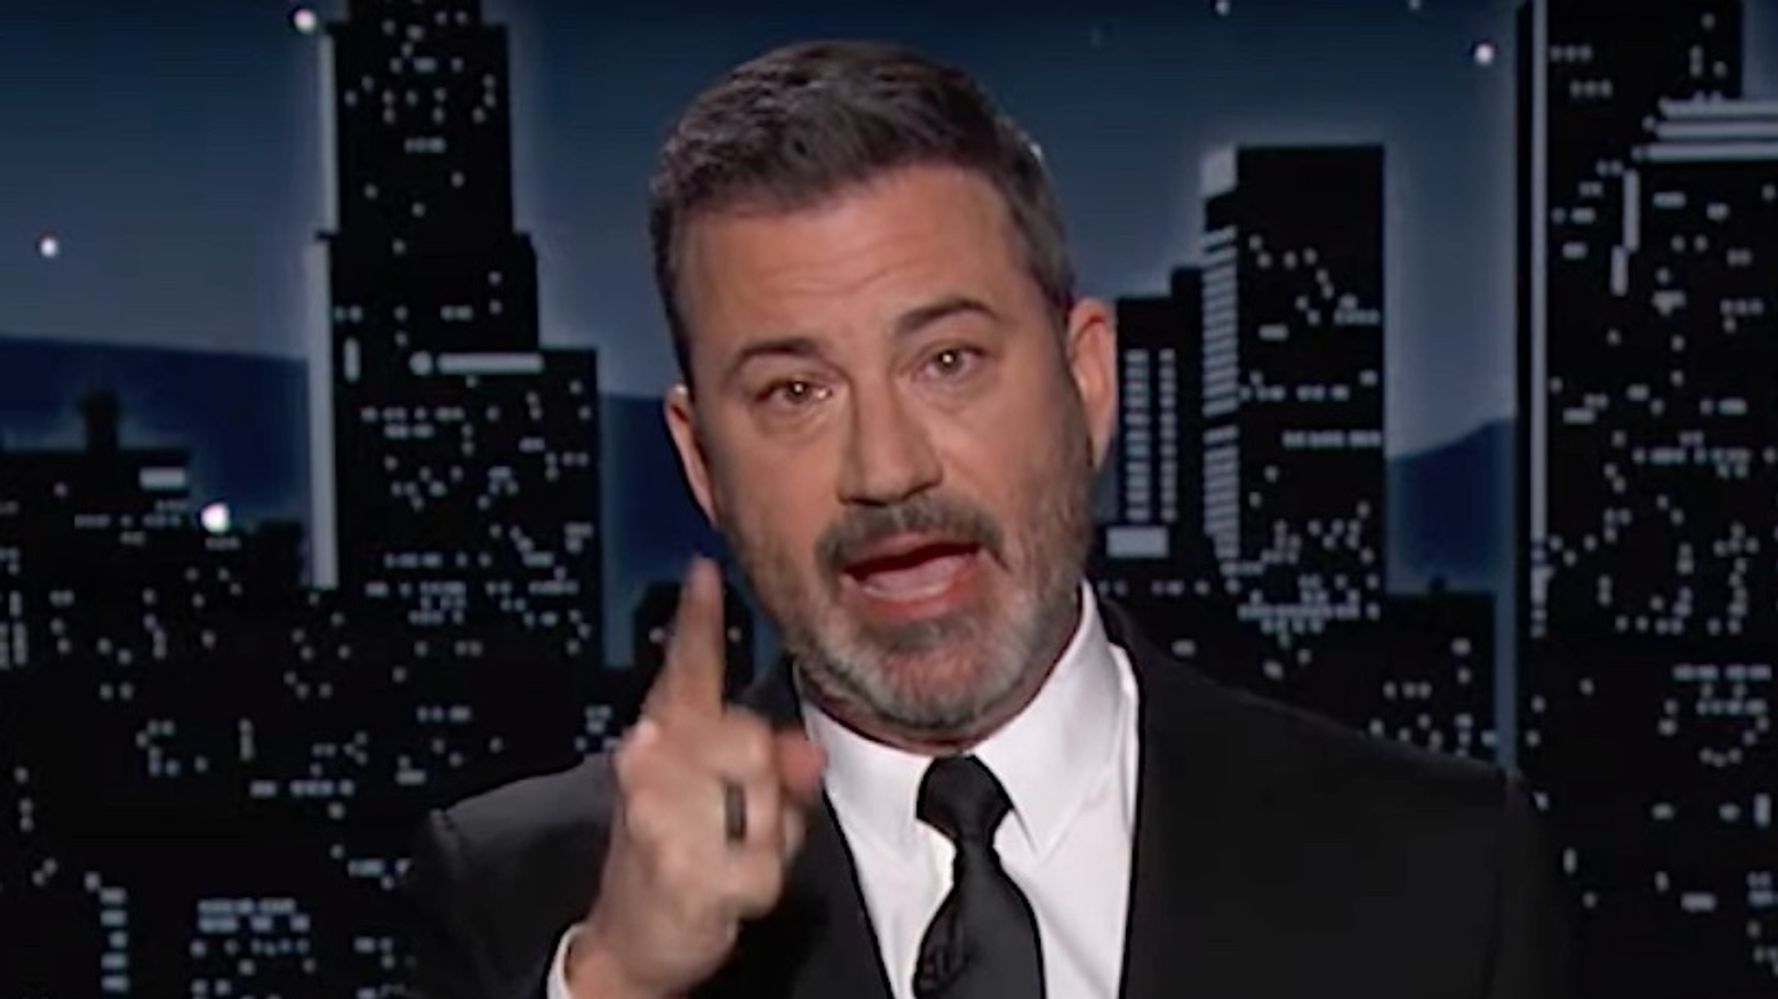 Tearful Jimmy Kimmel Calls Out 'Cowardly' Republicans By Name In Scathing Opener